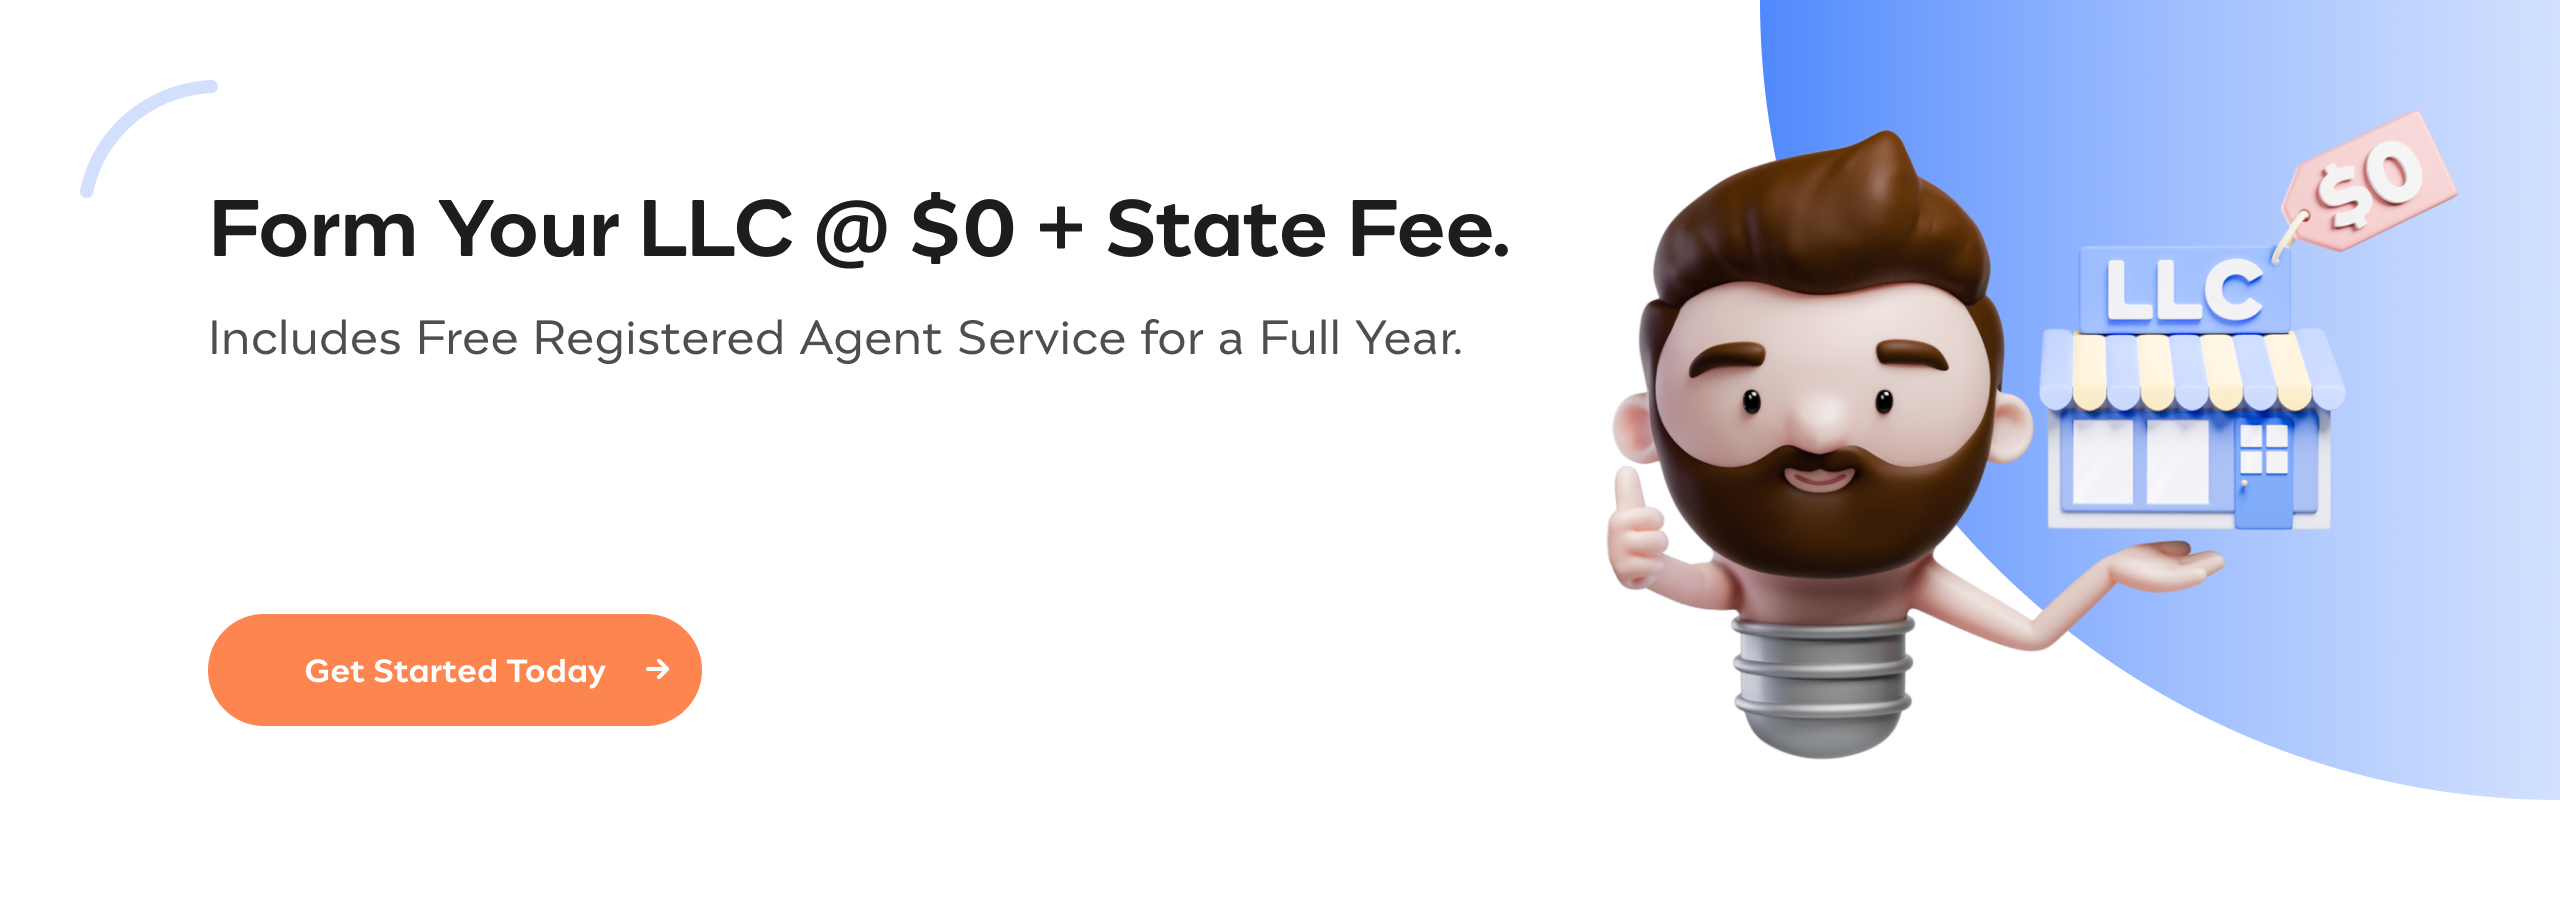 Form Your LLC @ $0 + State Fee. Includes Free Registered Agent Service for a Full Year.